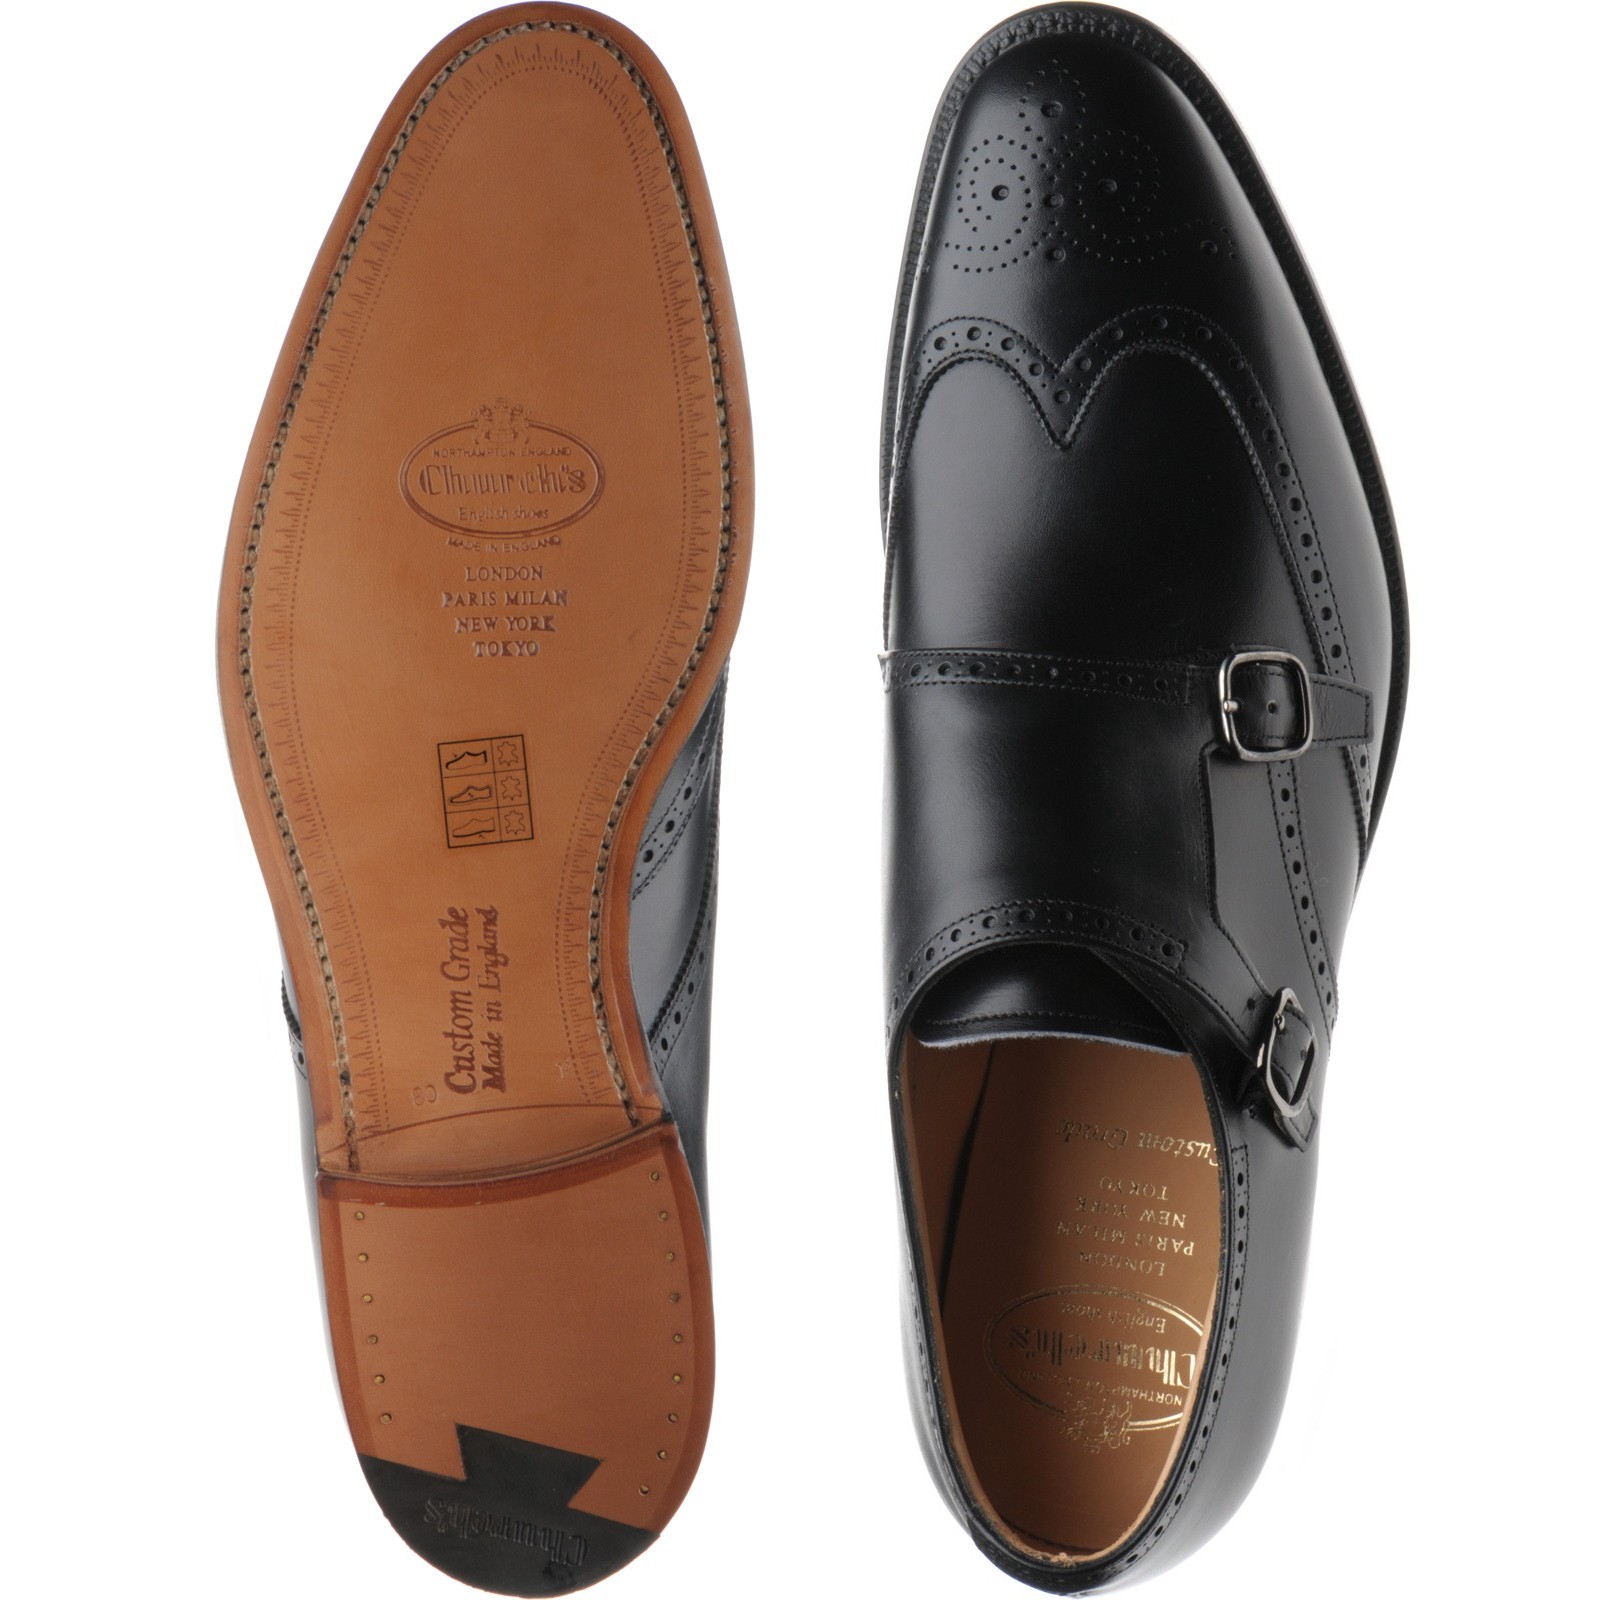 Church shoes | Church Office | Chicago in Black Calf at Herring Shoes